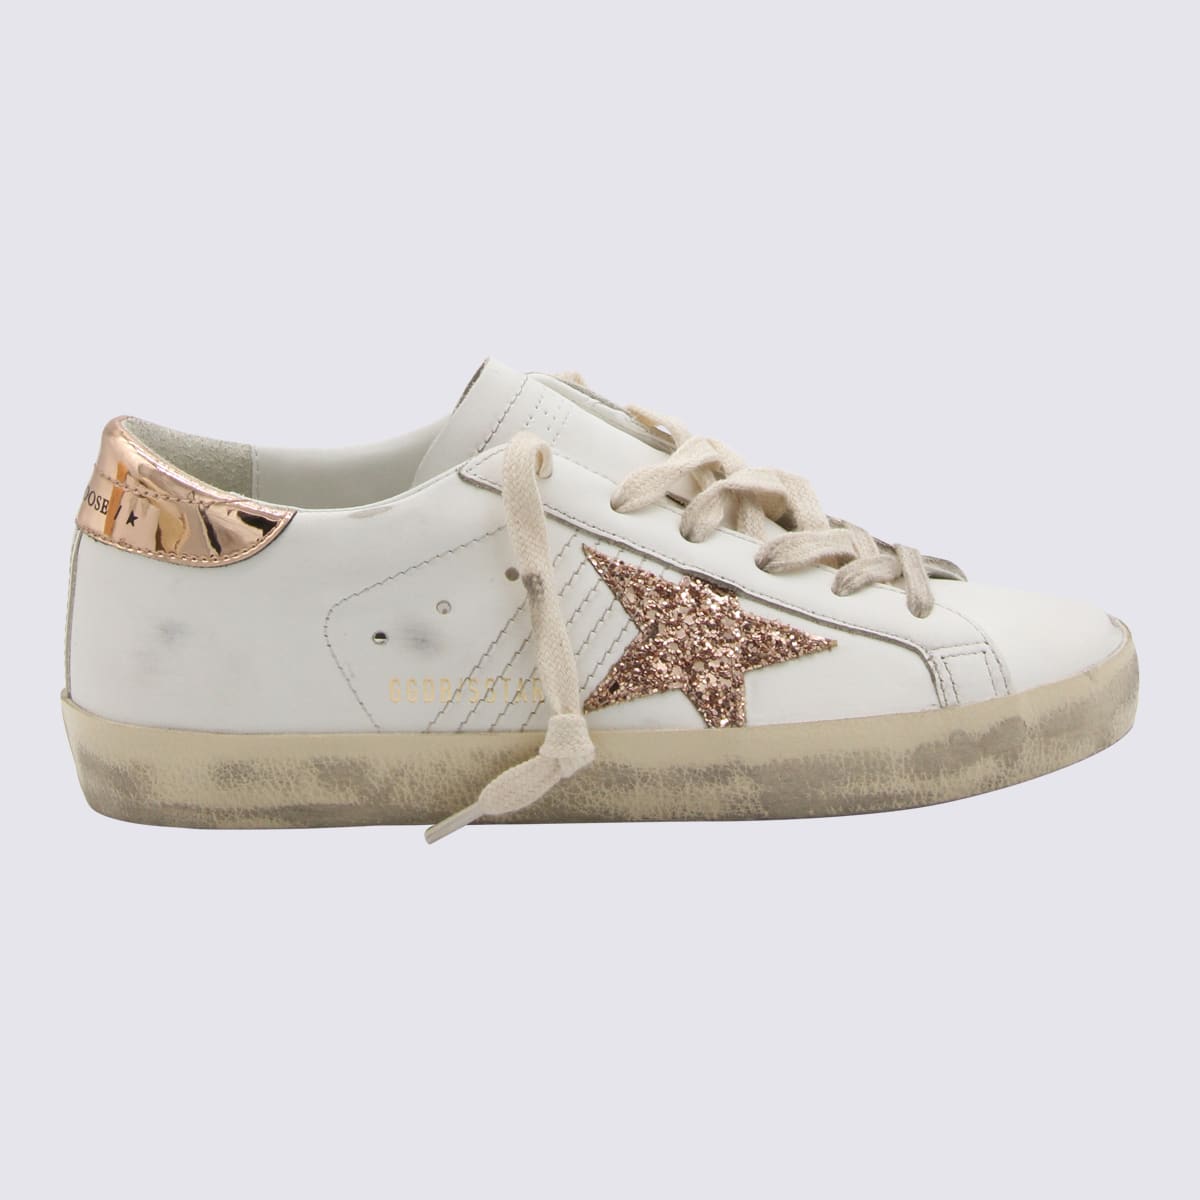 GOLDEN GOOSE WHITE AND GOLD LEATHER SNEAKERS